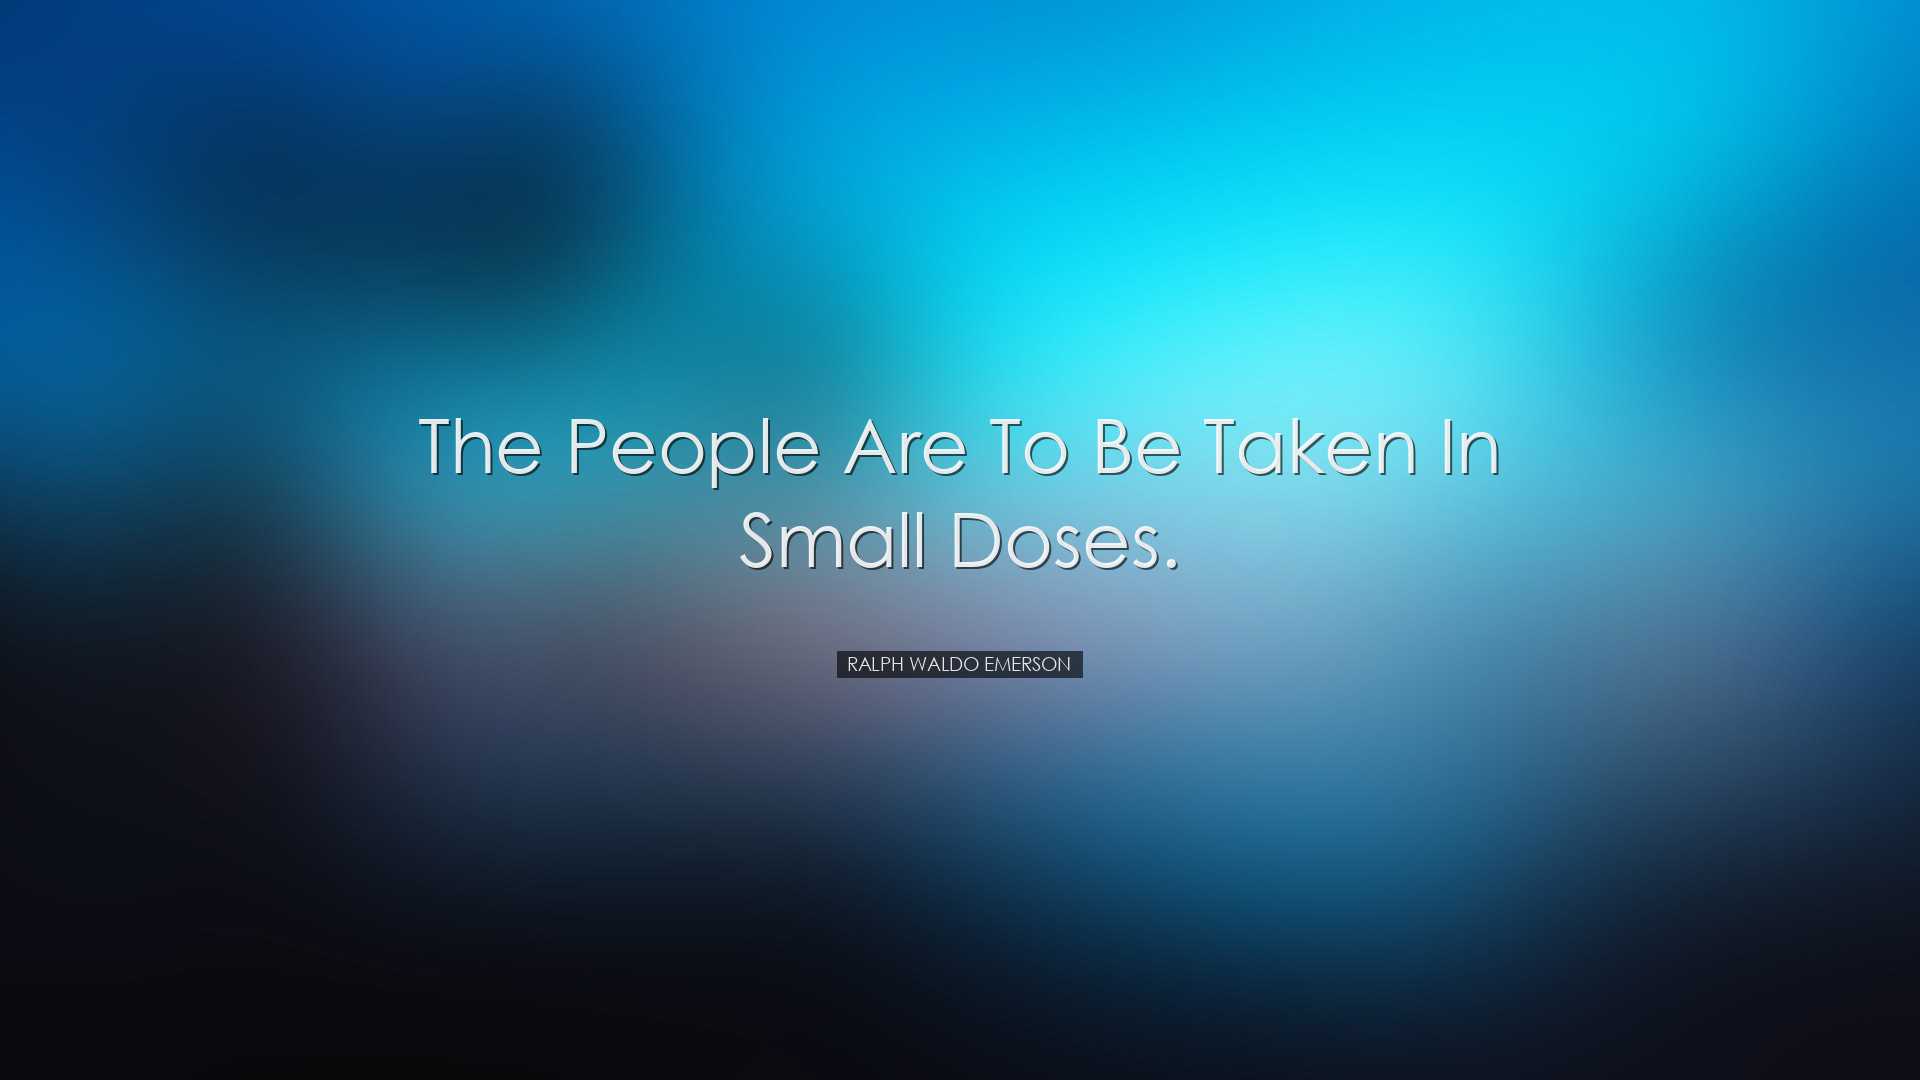 The people are to be taken in small doses. - Ralph Waldo Emerson